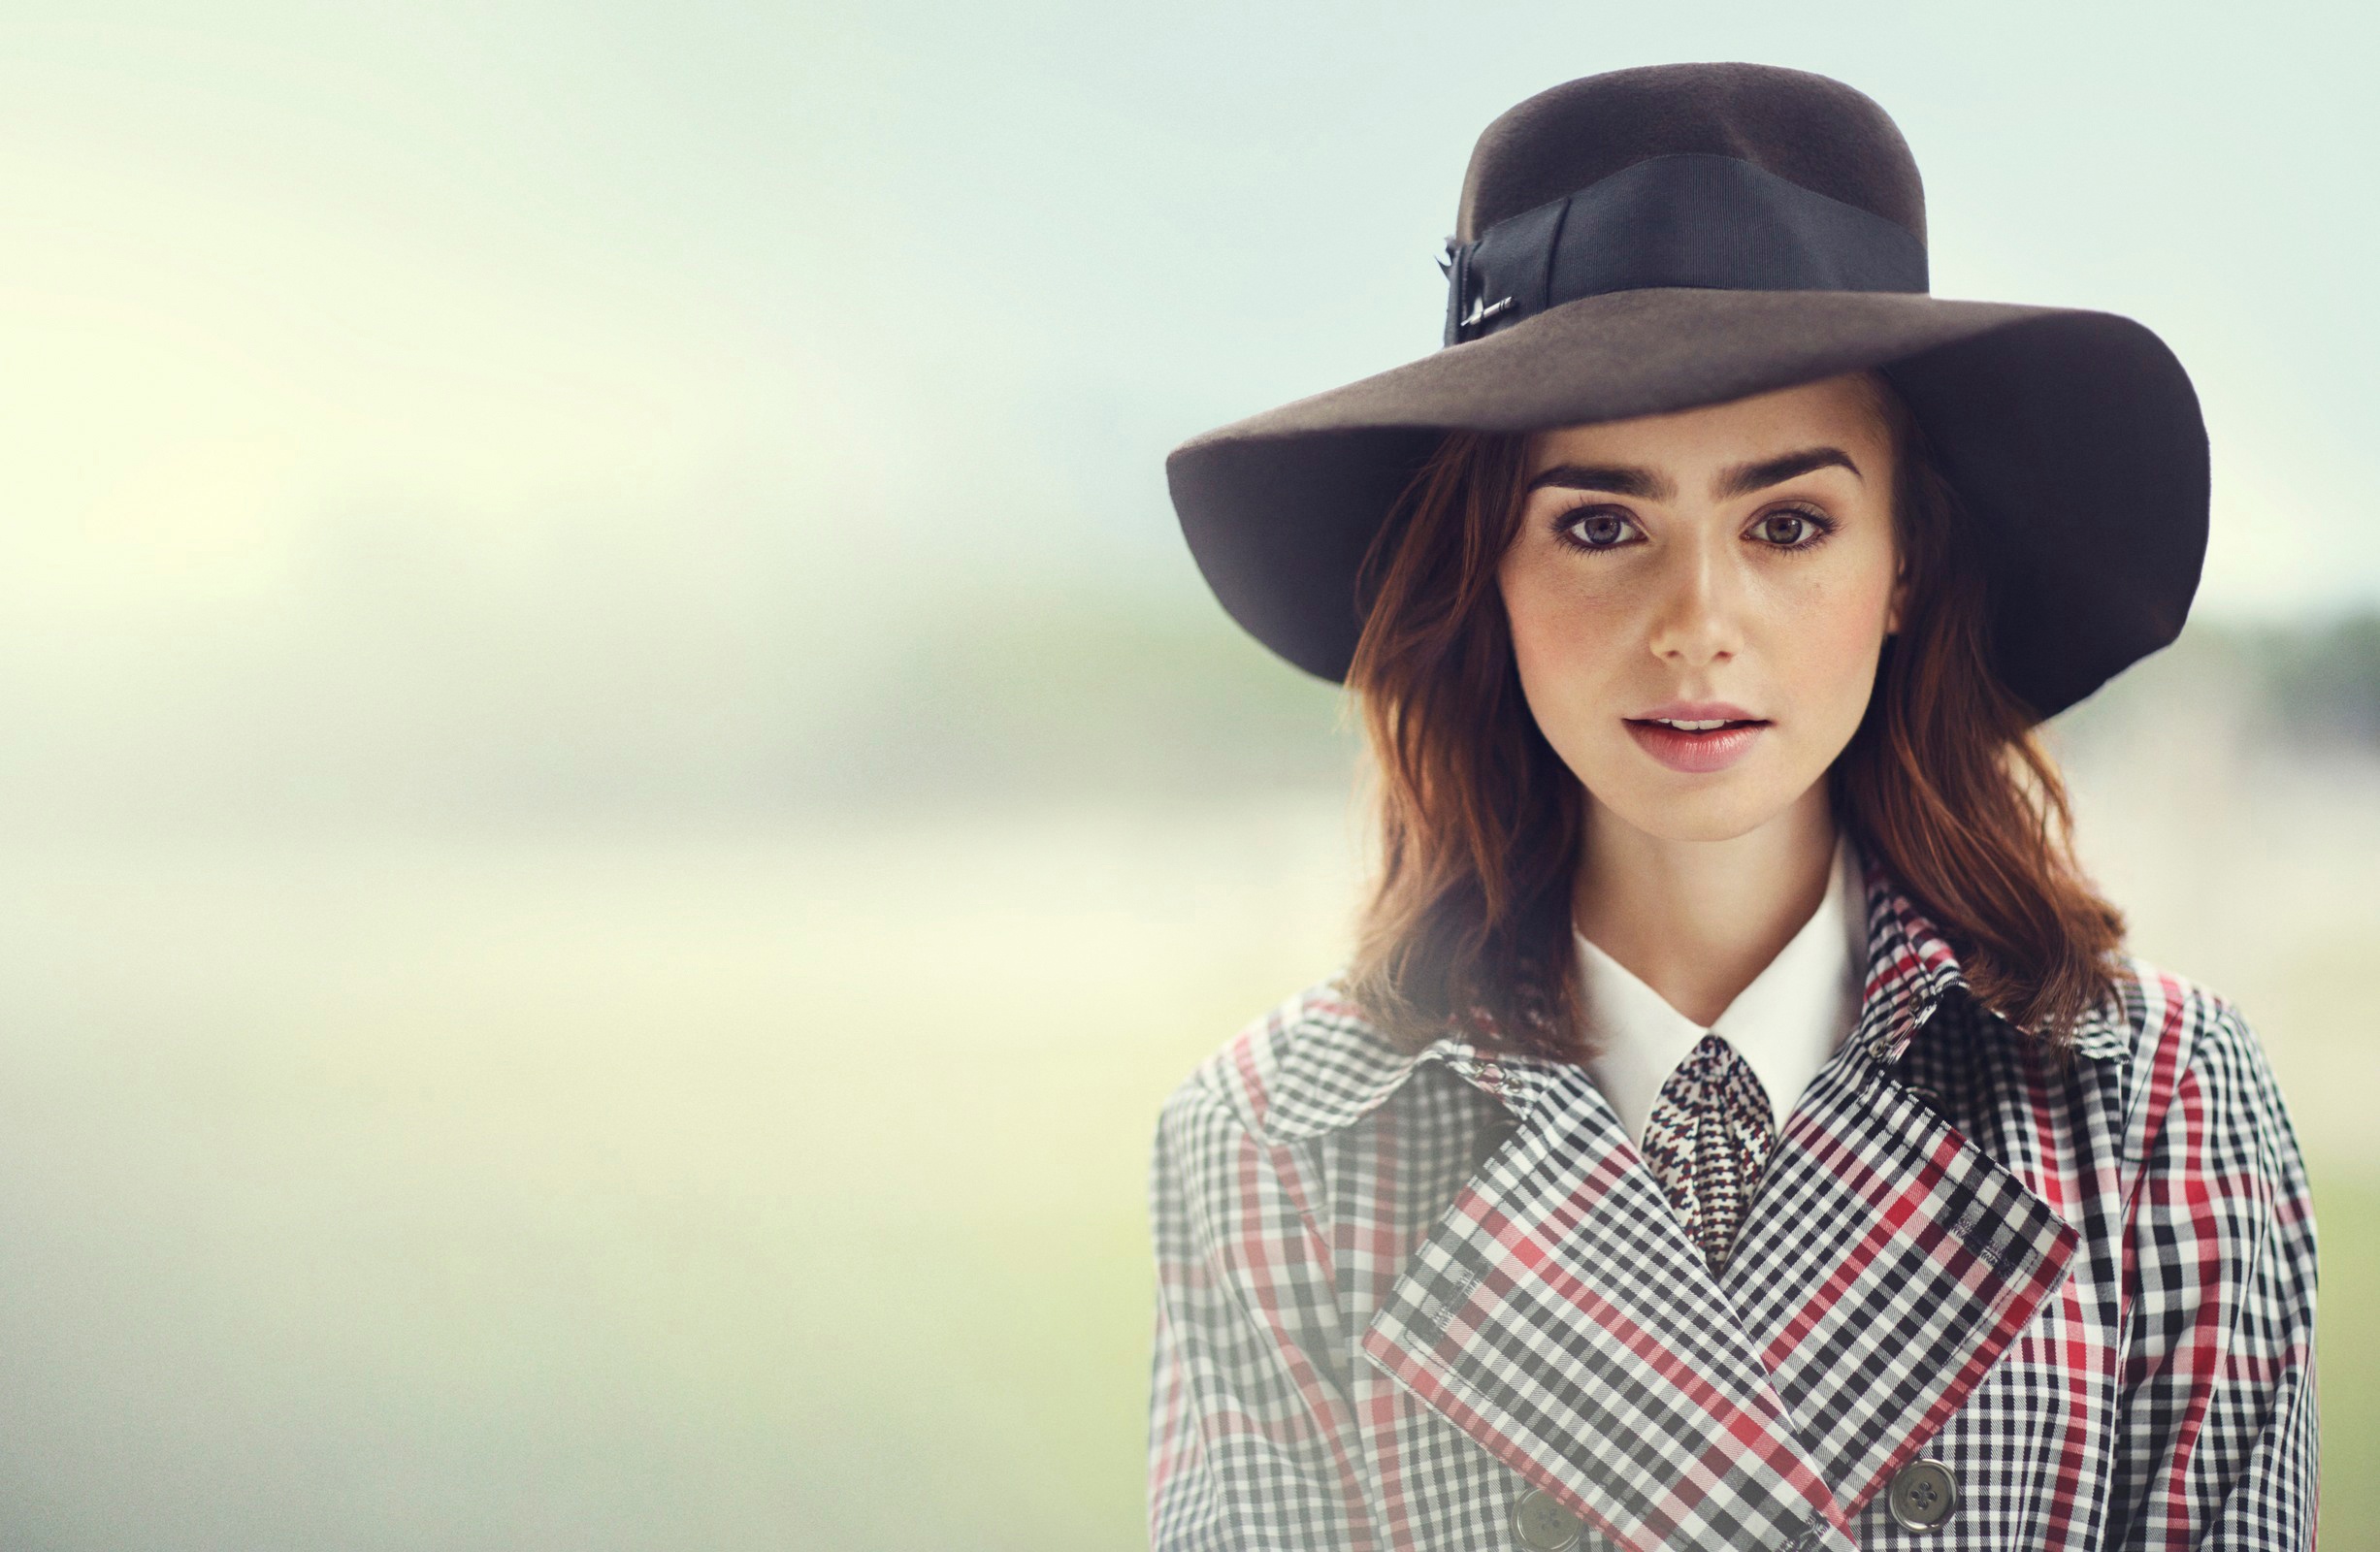 Actress Lily Collins 2019 Wallpapers